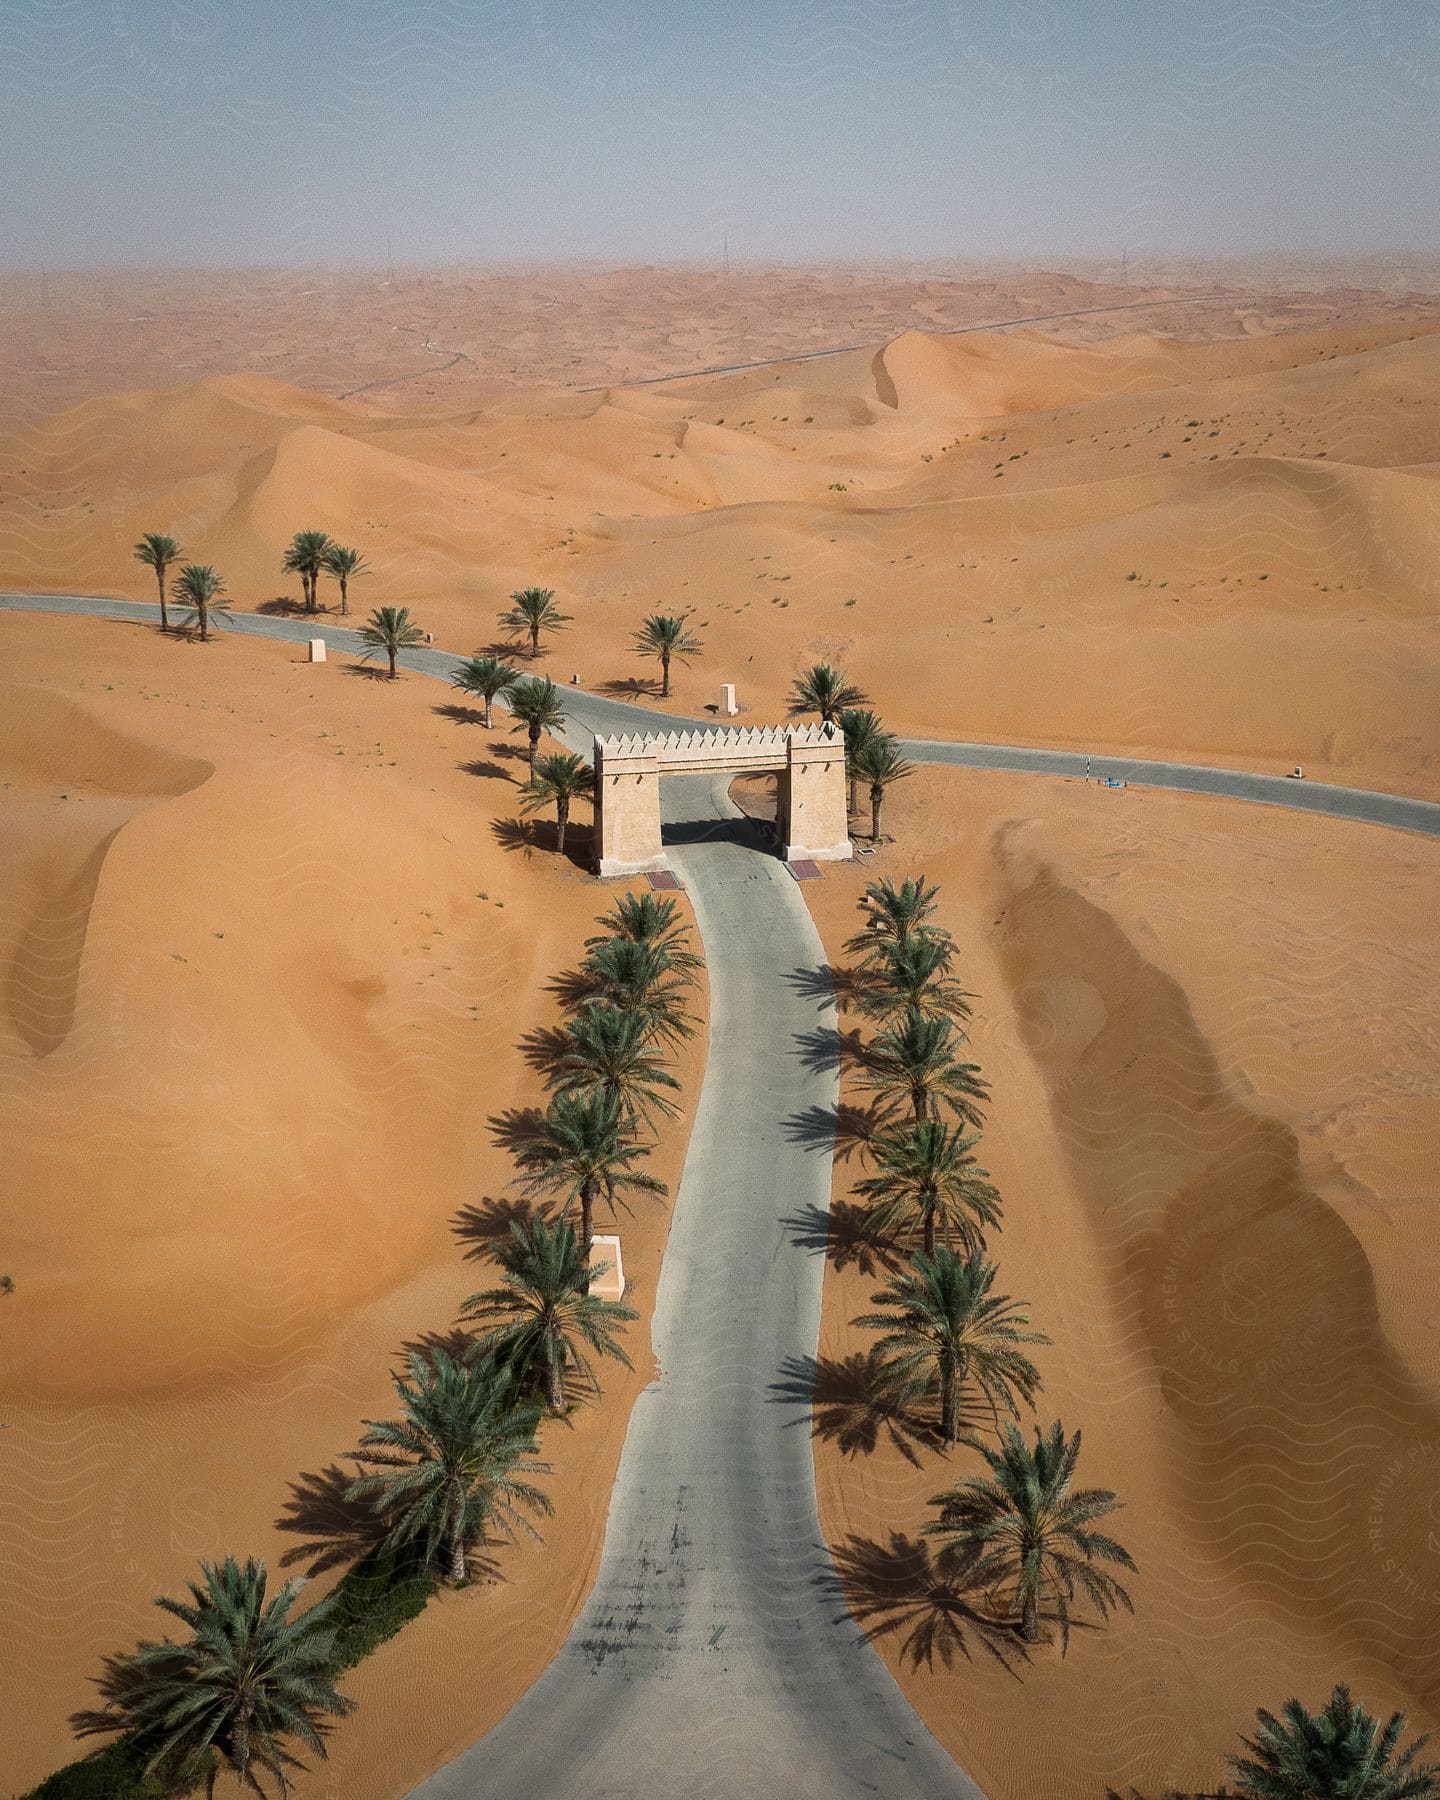 A landscape with a desert road trees and a building in the united arab emirates